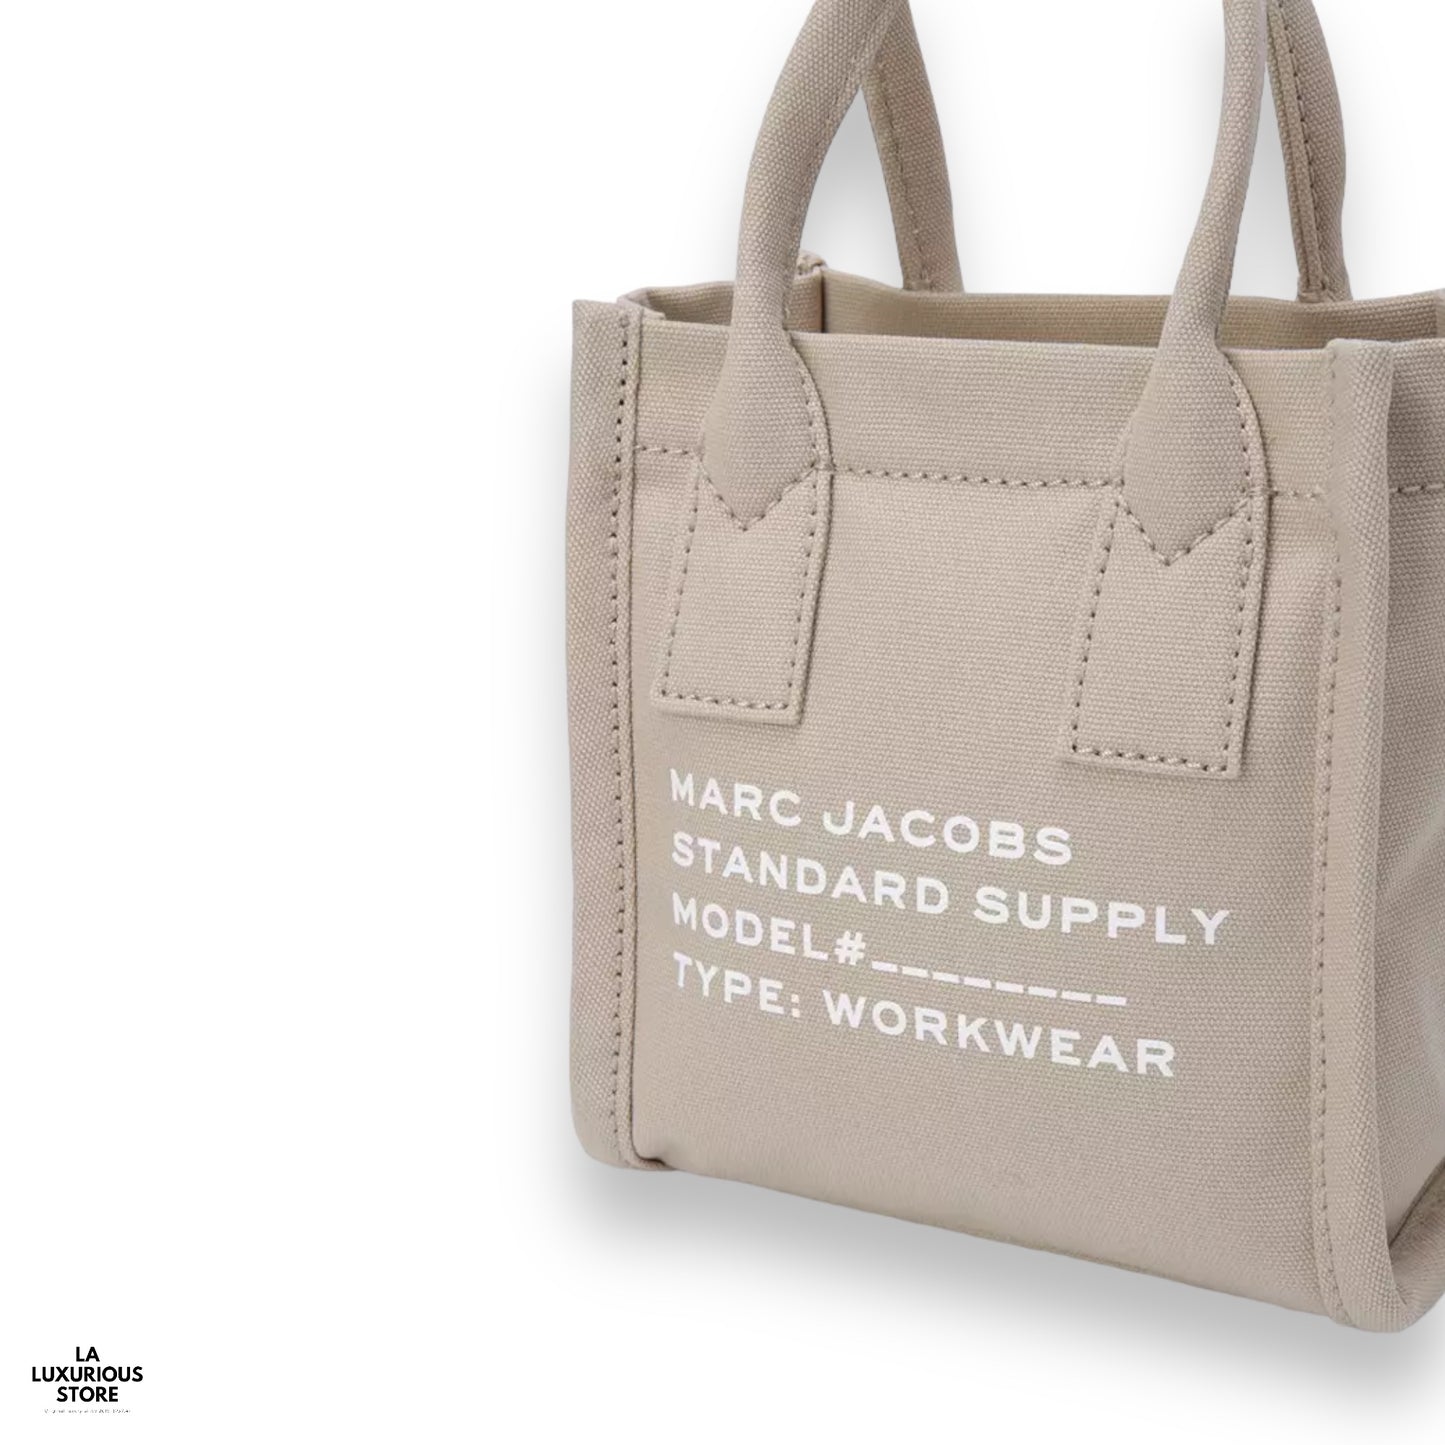 Marc Jacobs Workwear Tote Small Beige